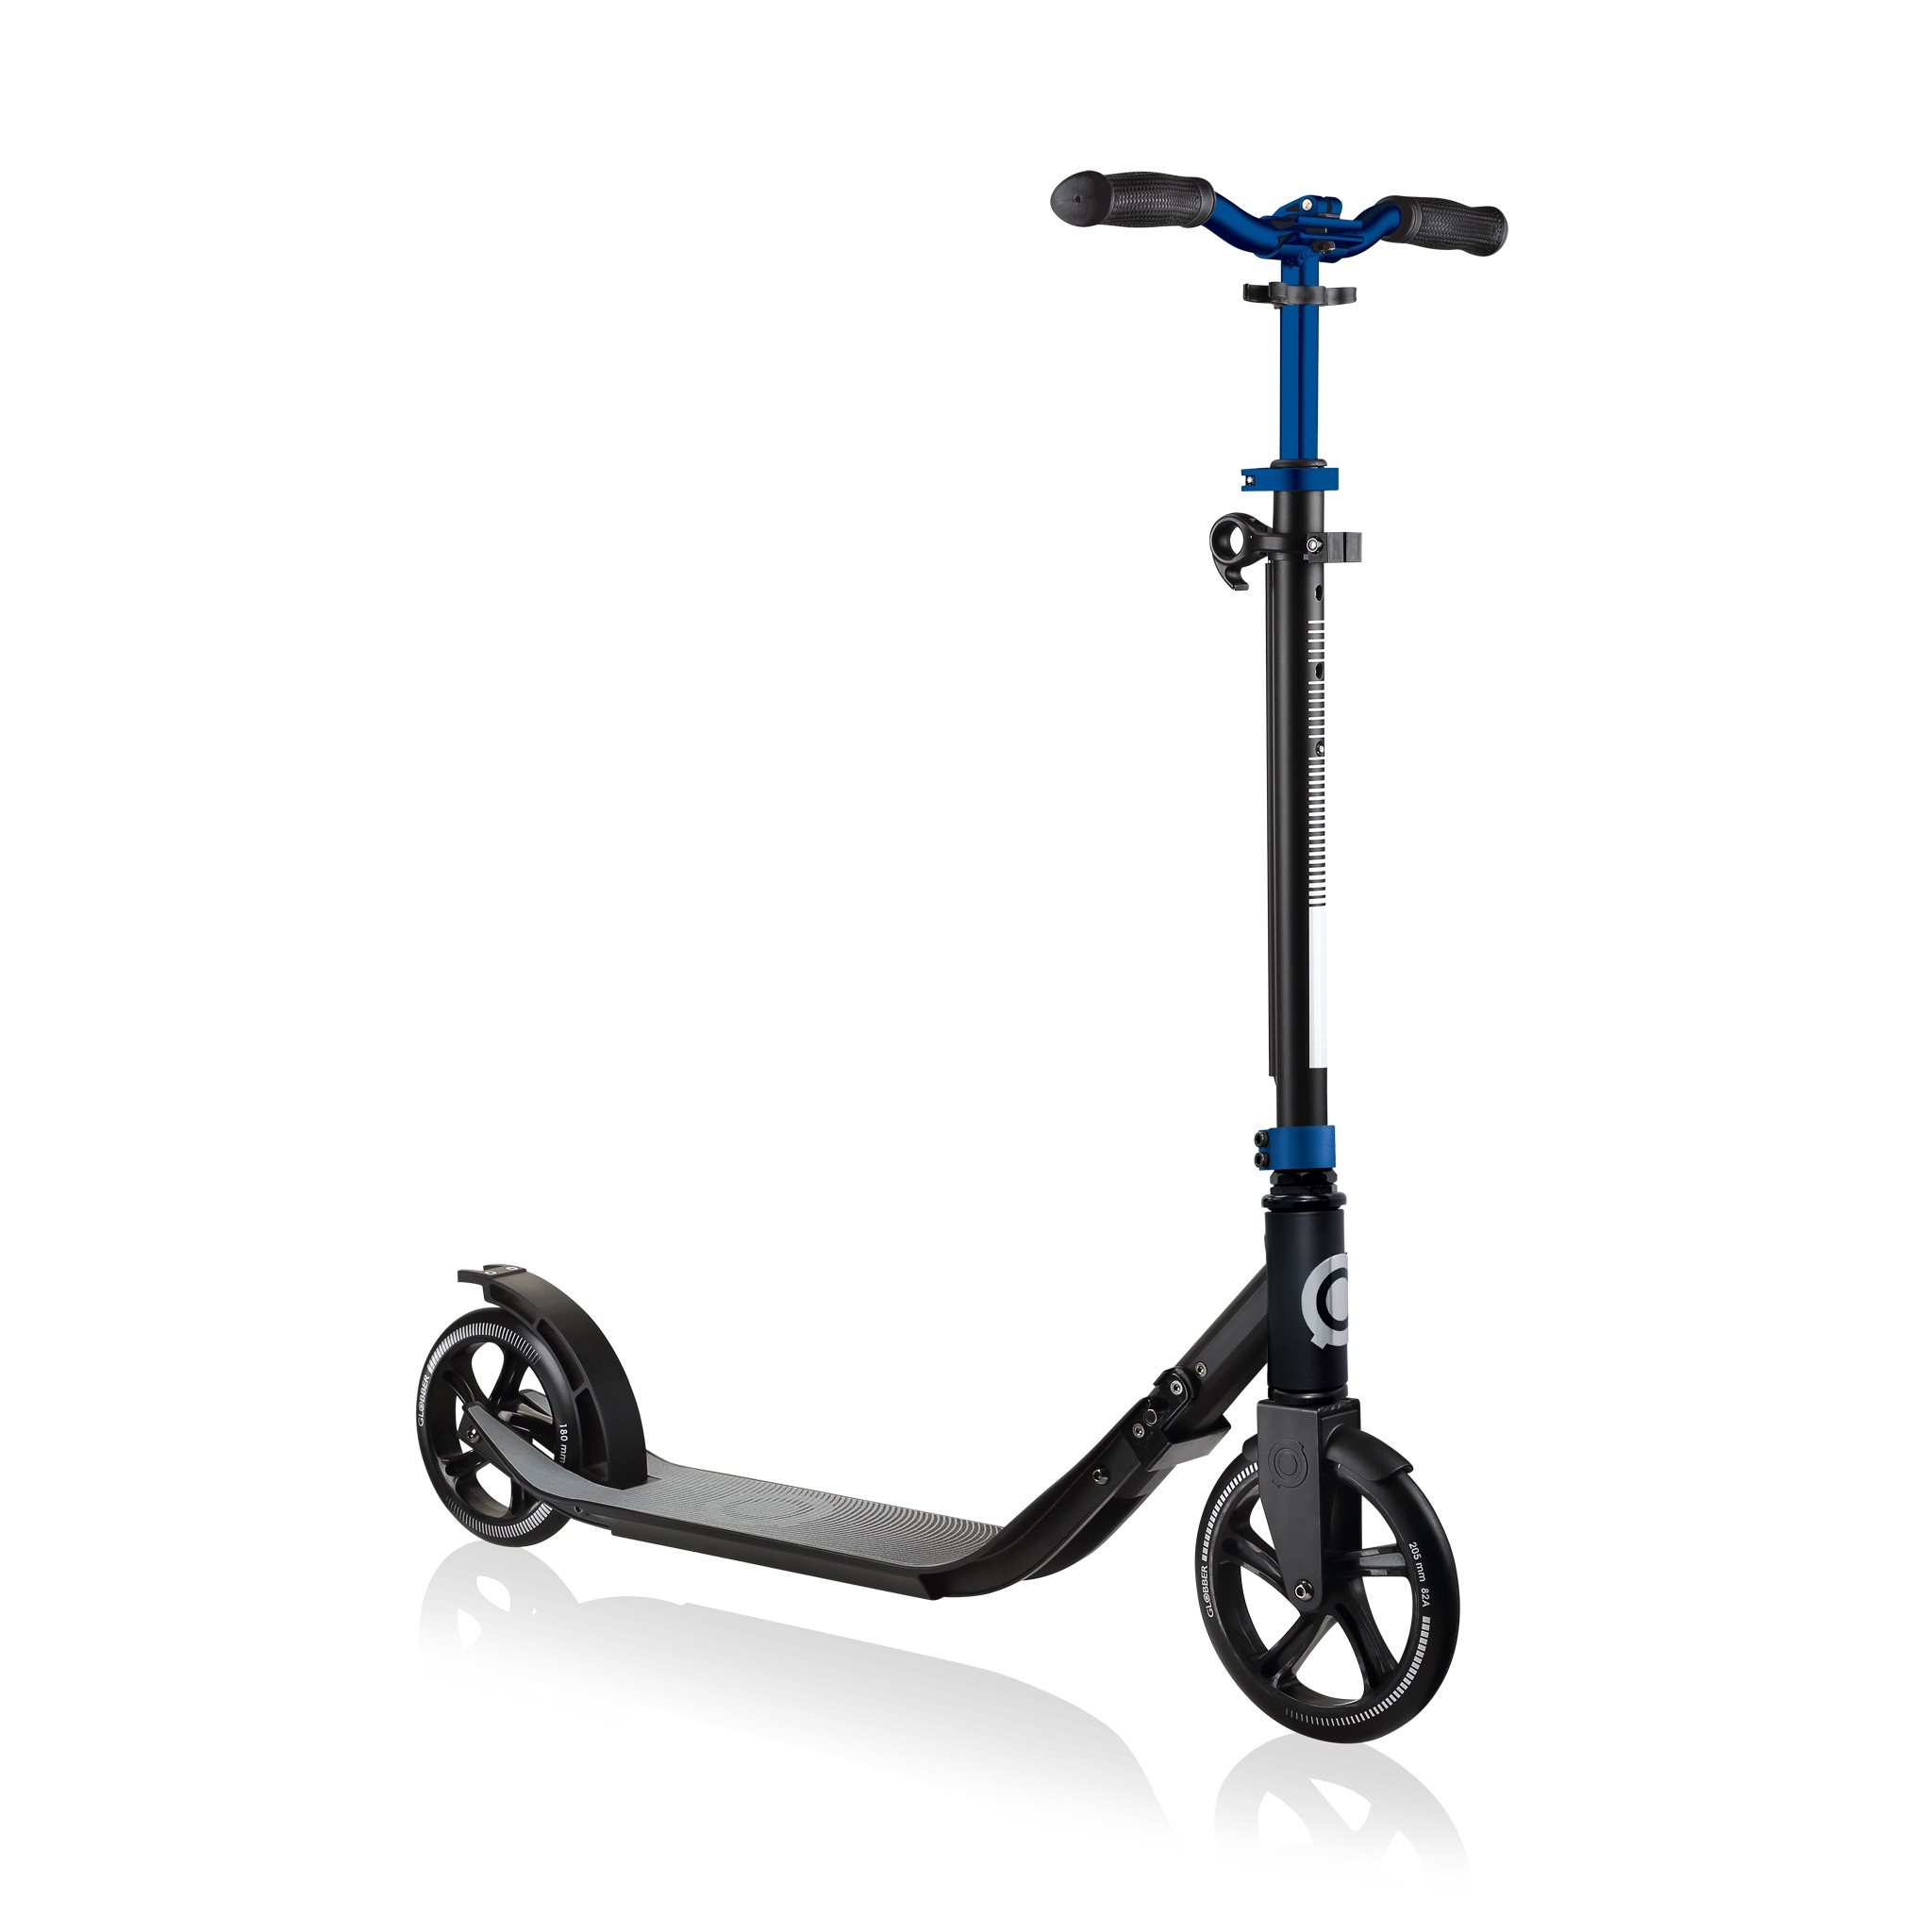 Globber-ONE-NL-205-180-DUO-2-wheel-adjustable-scooter-for-adults-cobalt-blue 0